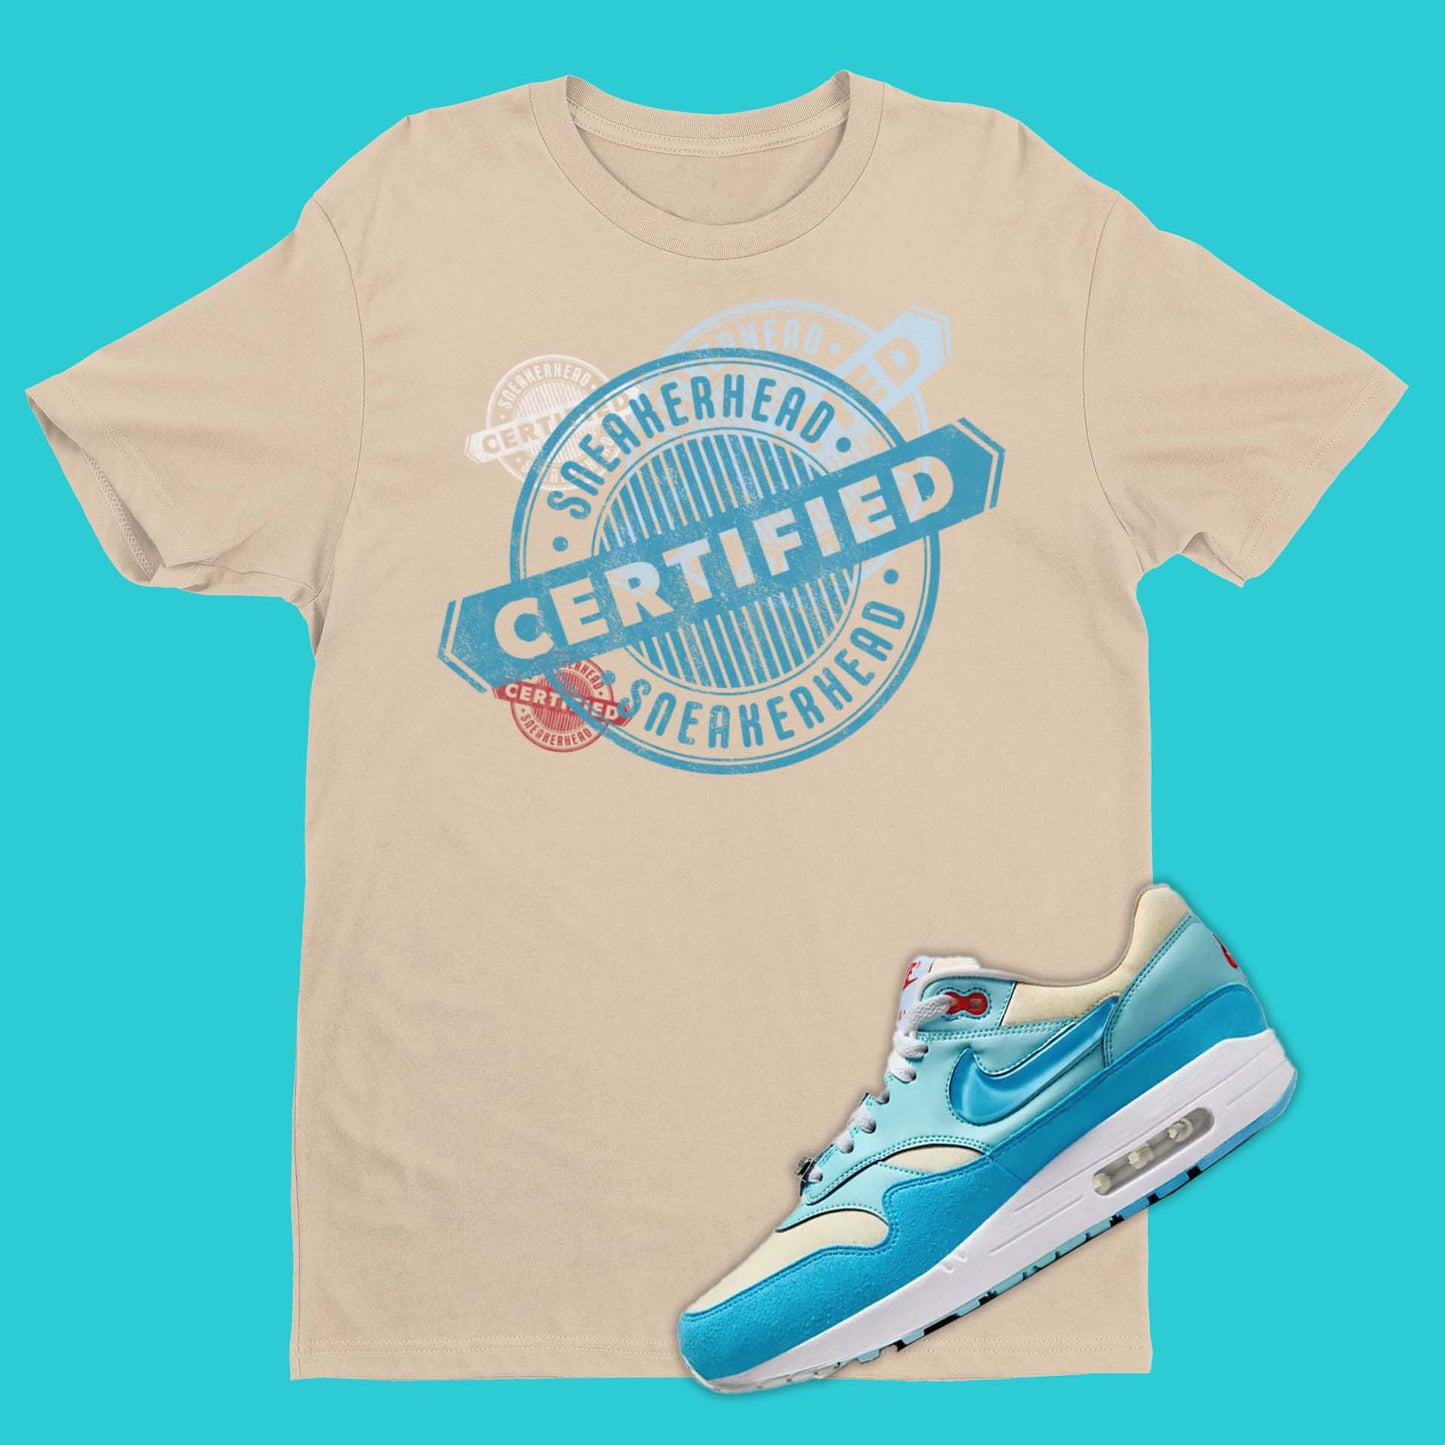 Nike Air Max 1 Blue Gale | Certified Sneakerhead Unisex Shirts | SNKADX Sneaker Tees - SNKADX Sneaker T-Shirts